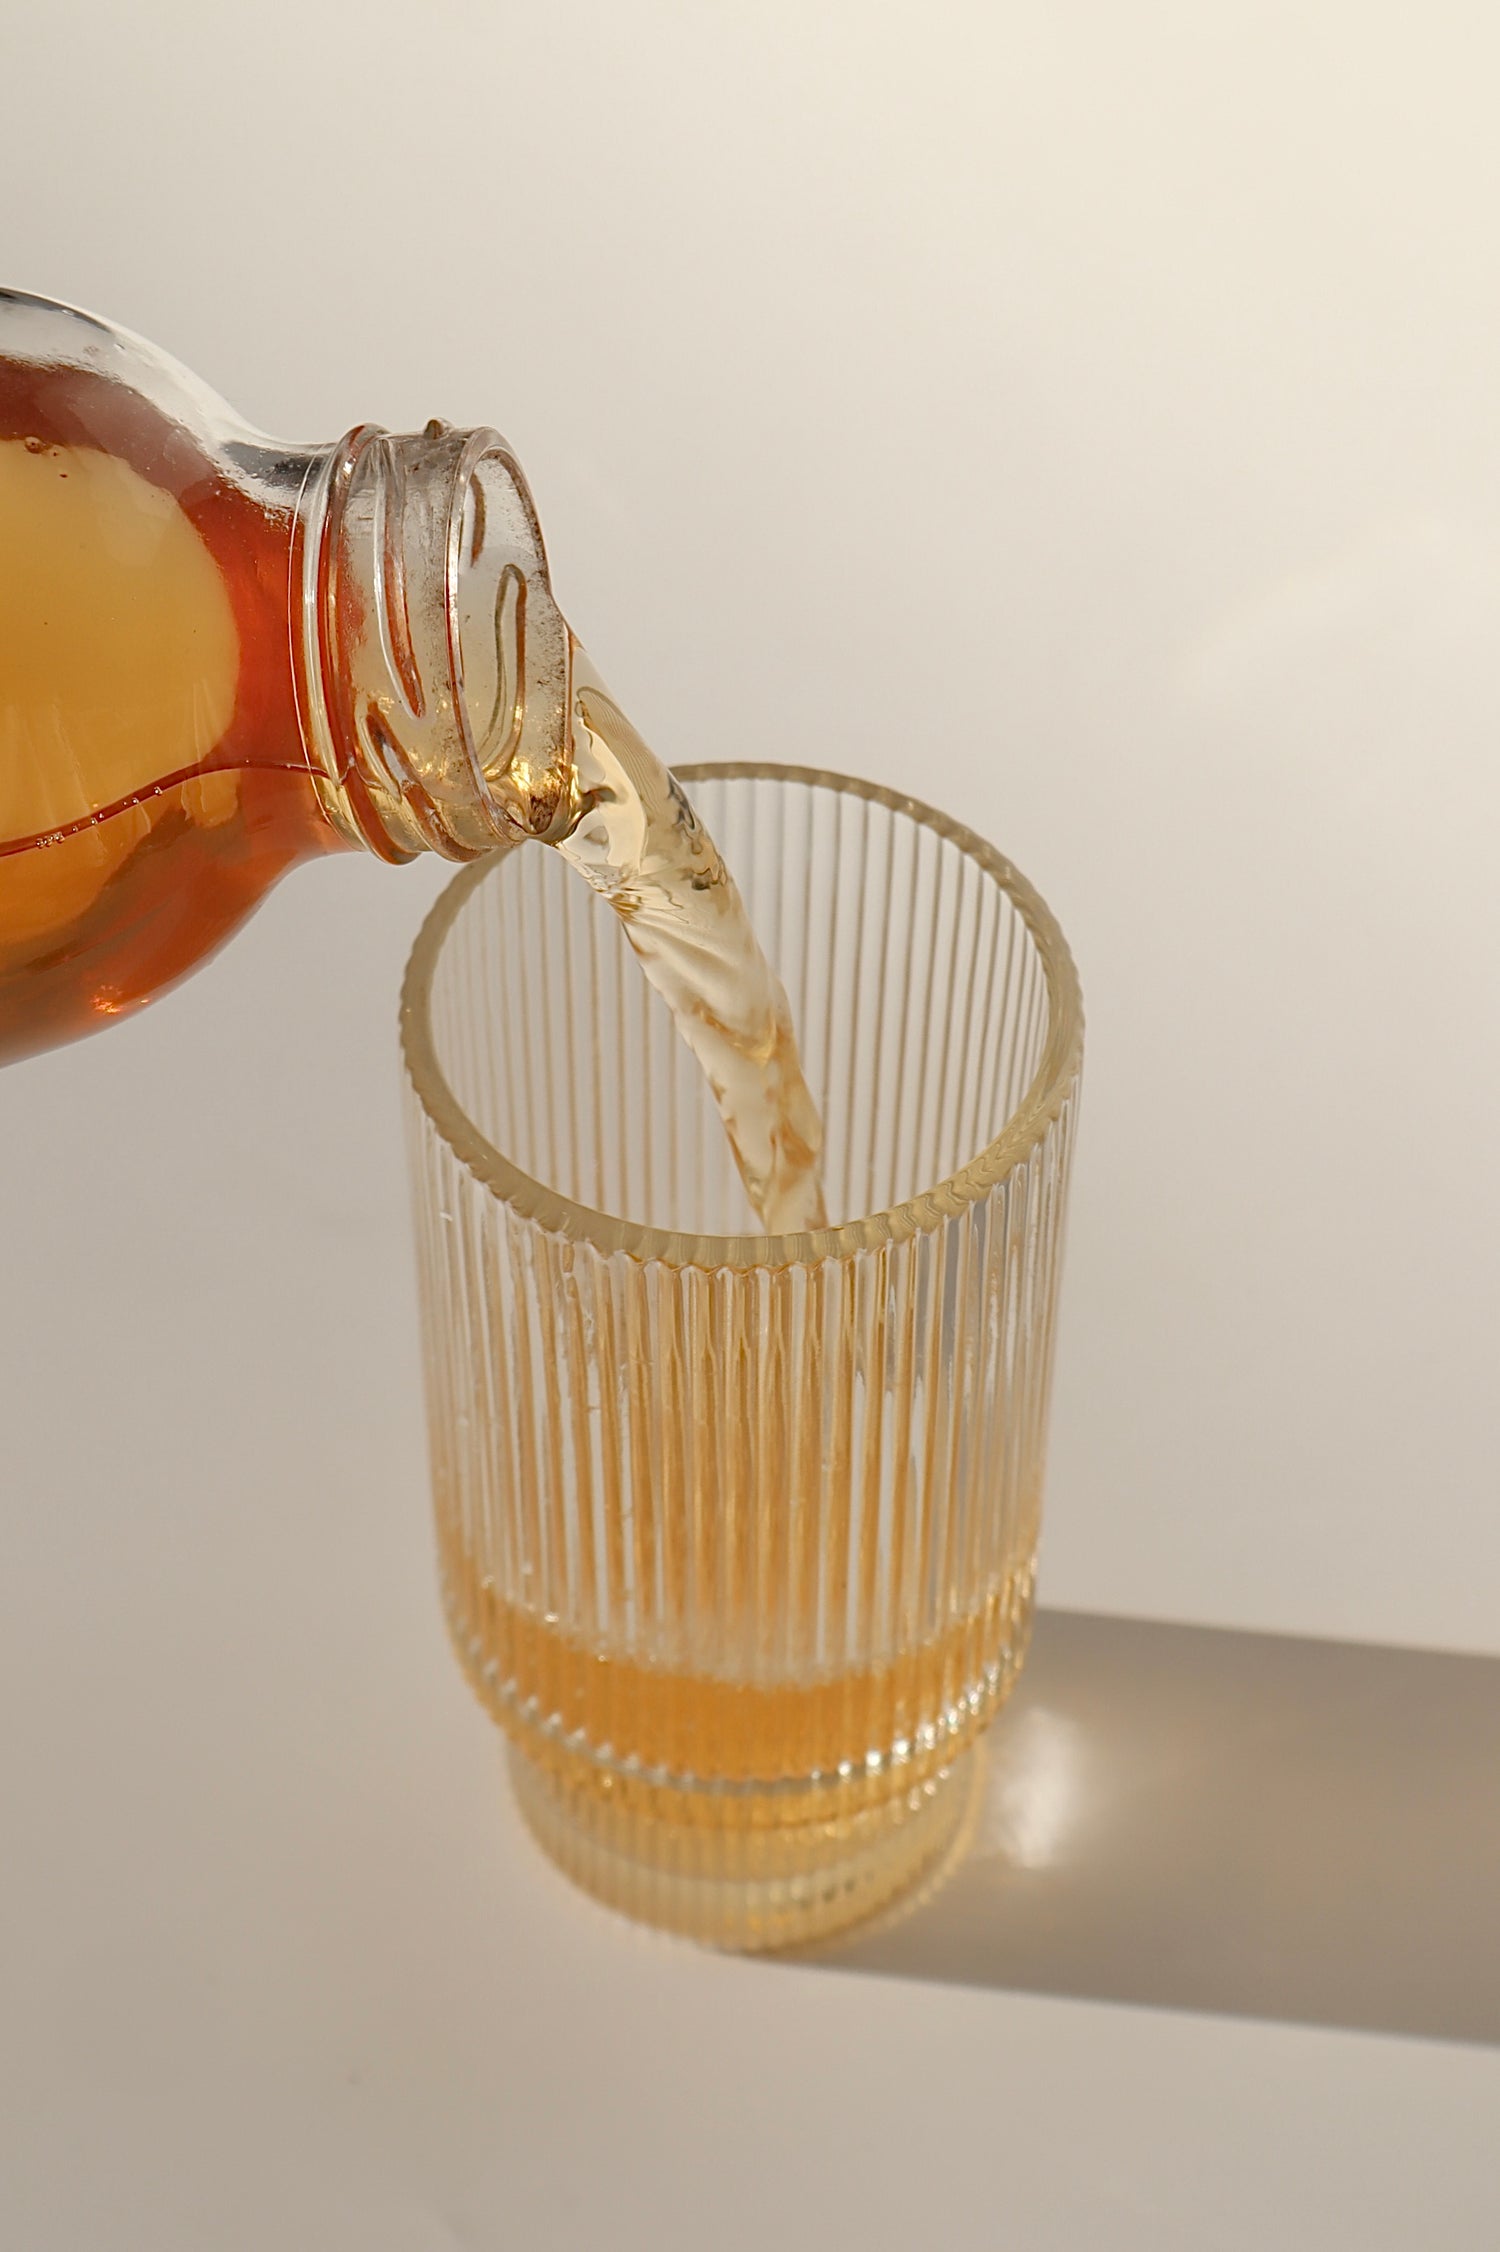 Photo of a delicious, fresh, raw and totally natural glass of kombucha being poured into a fancy glass, against an aesthetic background with nice shadows being cast - boochacha